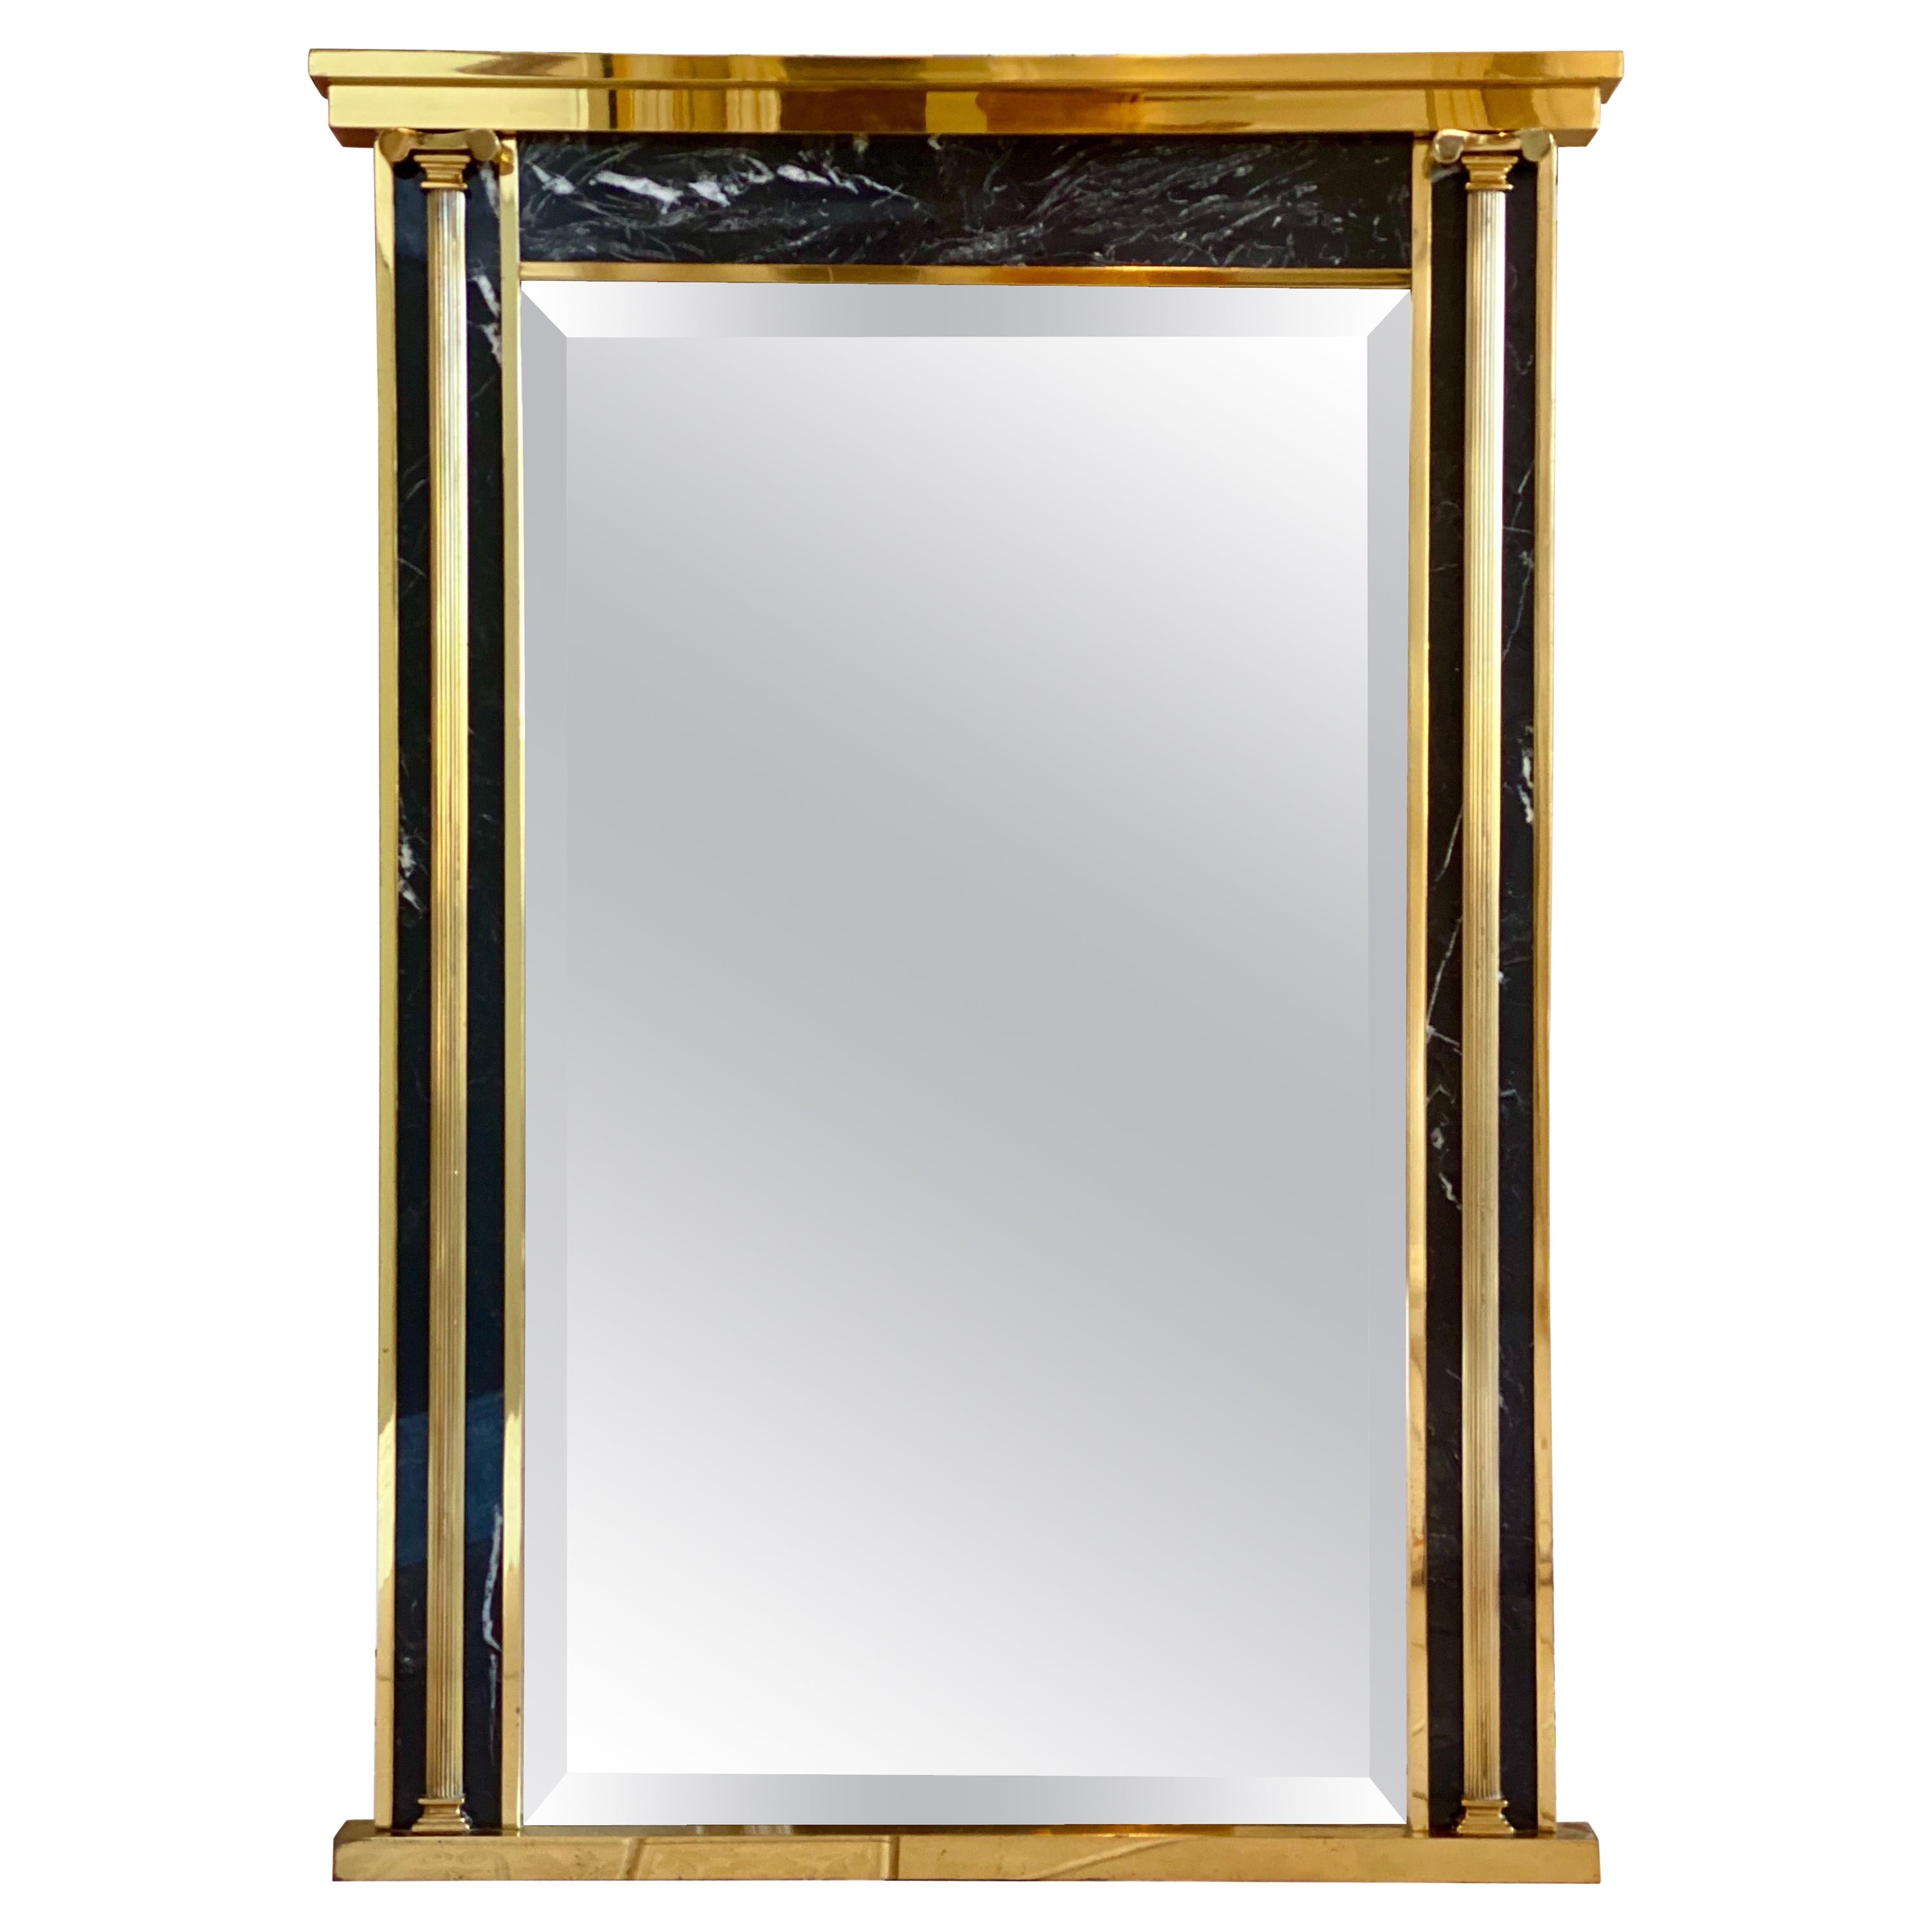 1970s Art Deco La Barge Modern Empire Style Brass and Marble Mirror For Sale